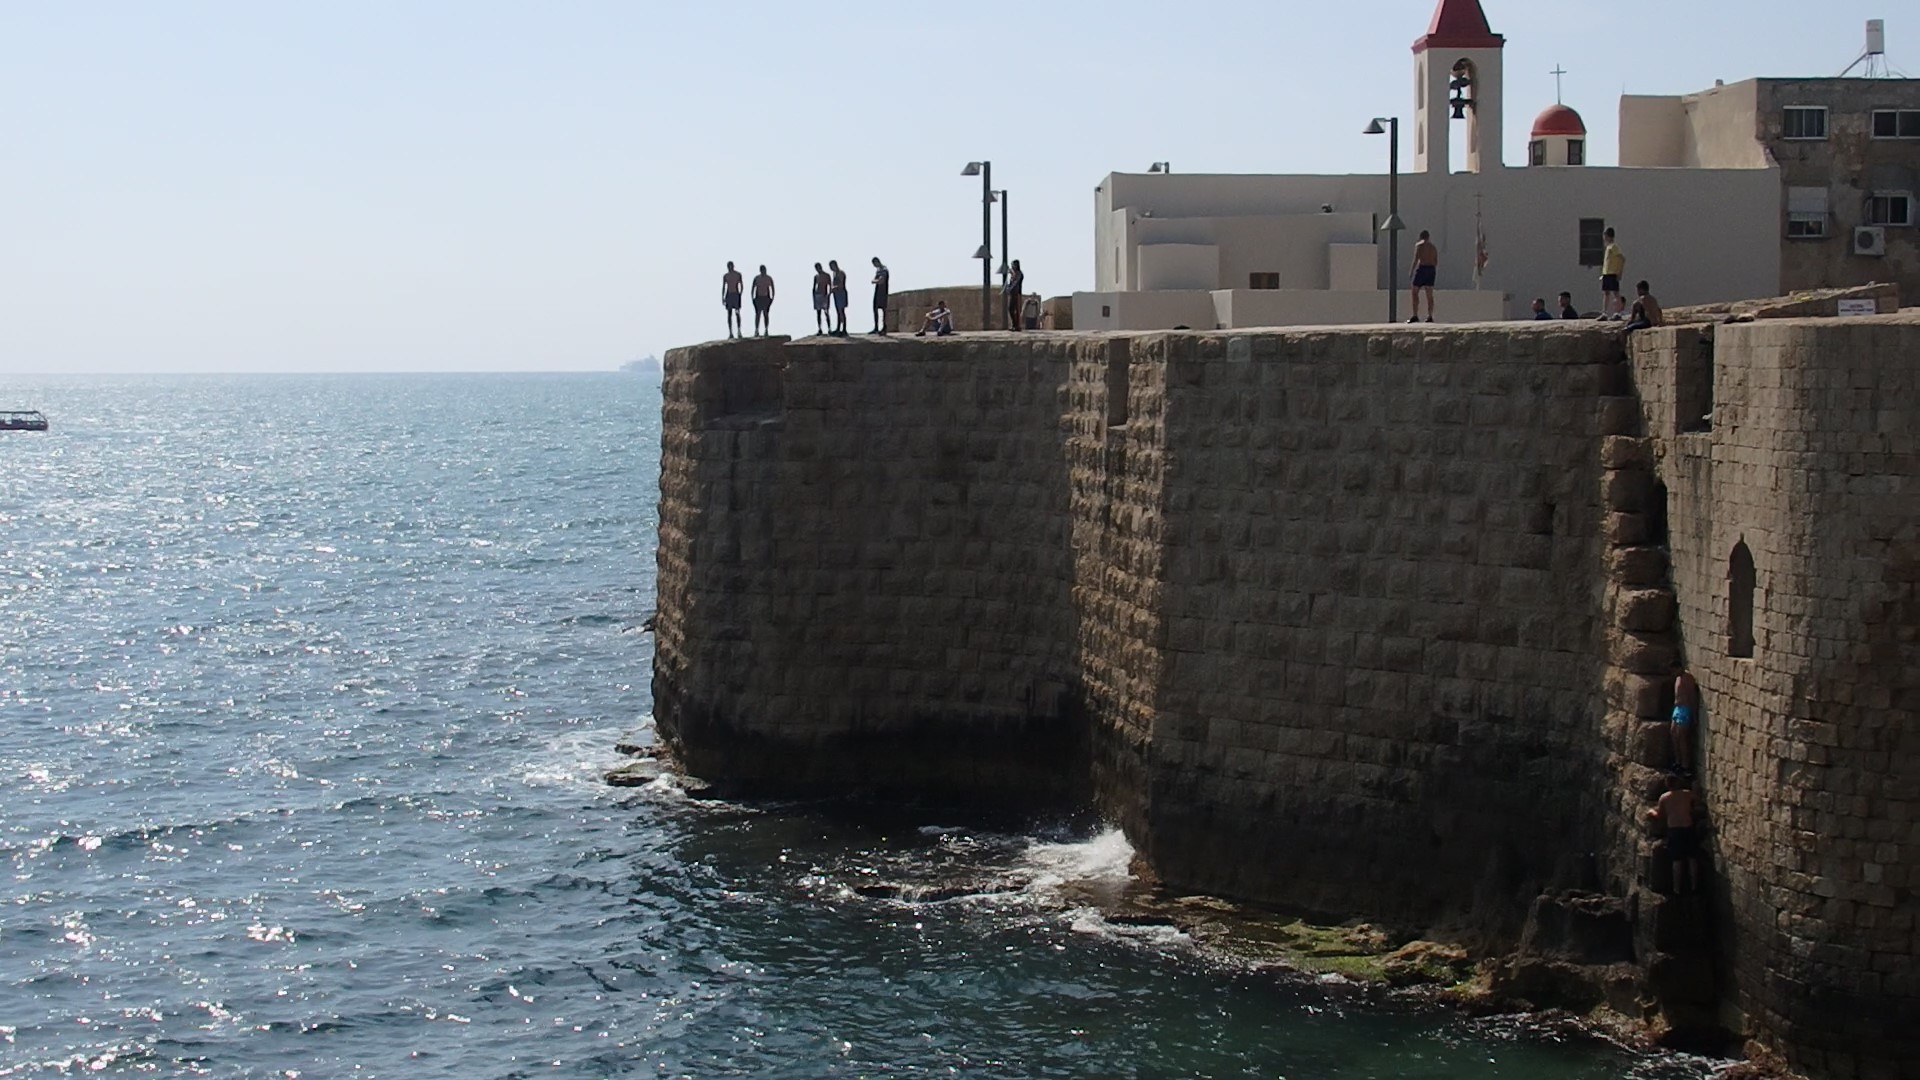 A view of the wall around Akko old city. Notice the boys preparing to jump from the wall, and, on the bottom right, a couple of boys climbing up from the water.